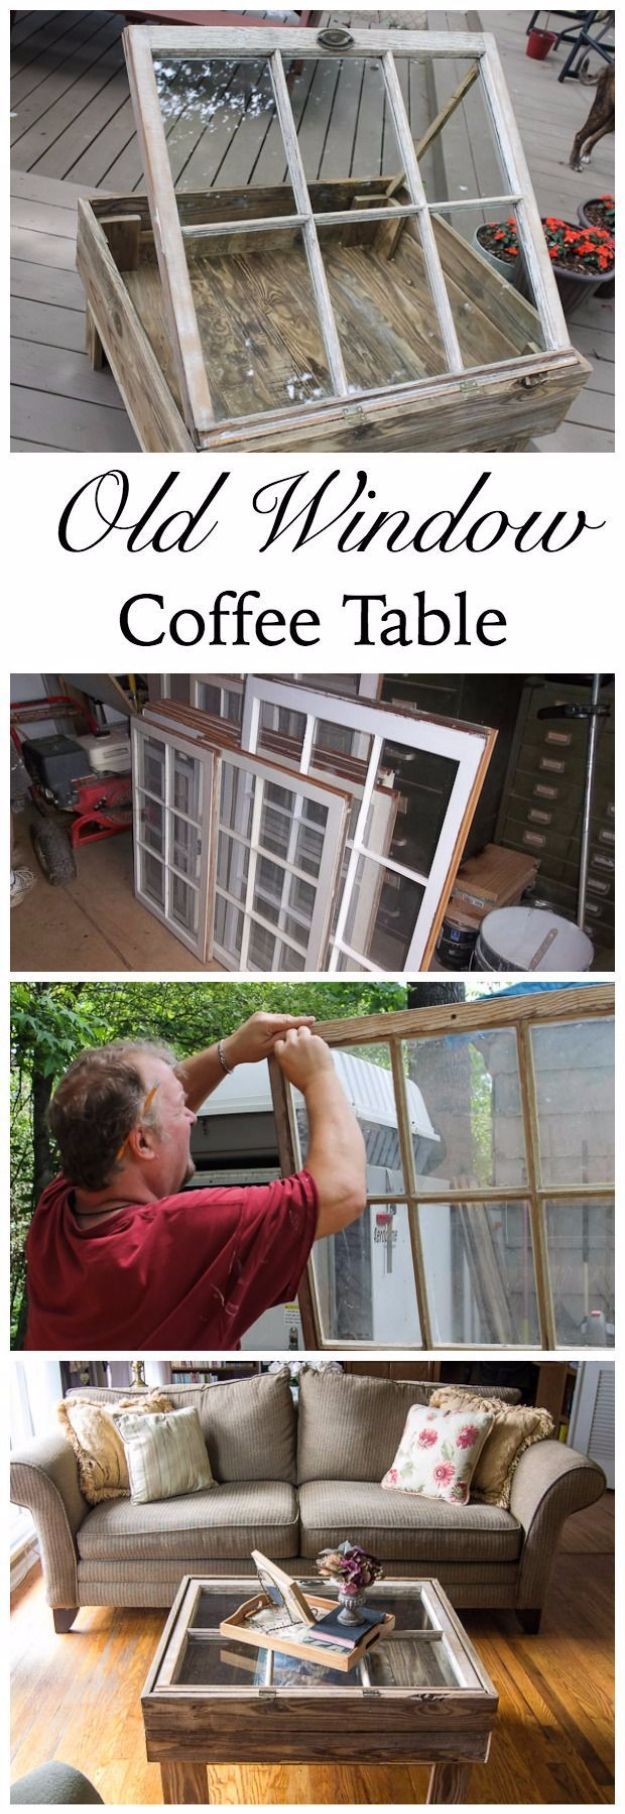 20 diy projects With Pallets old windows ideas